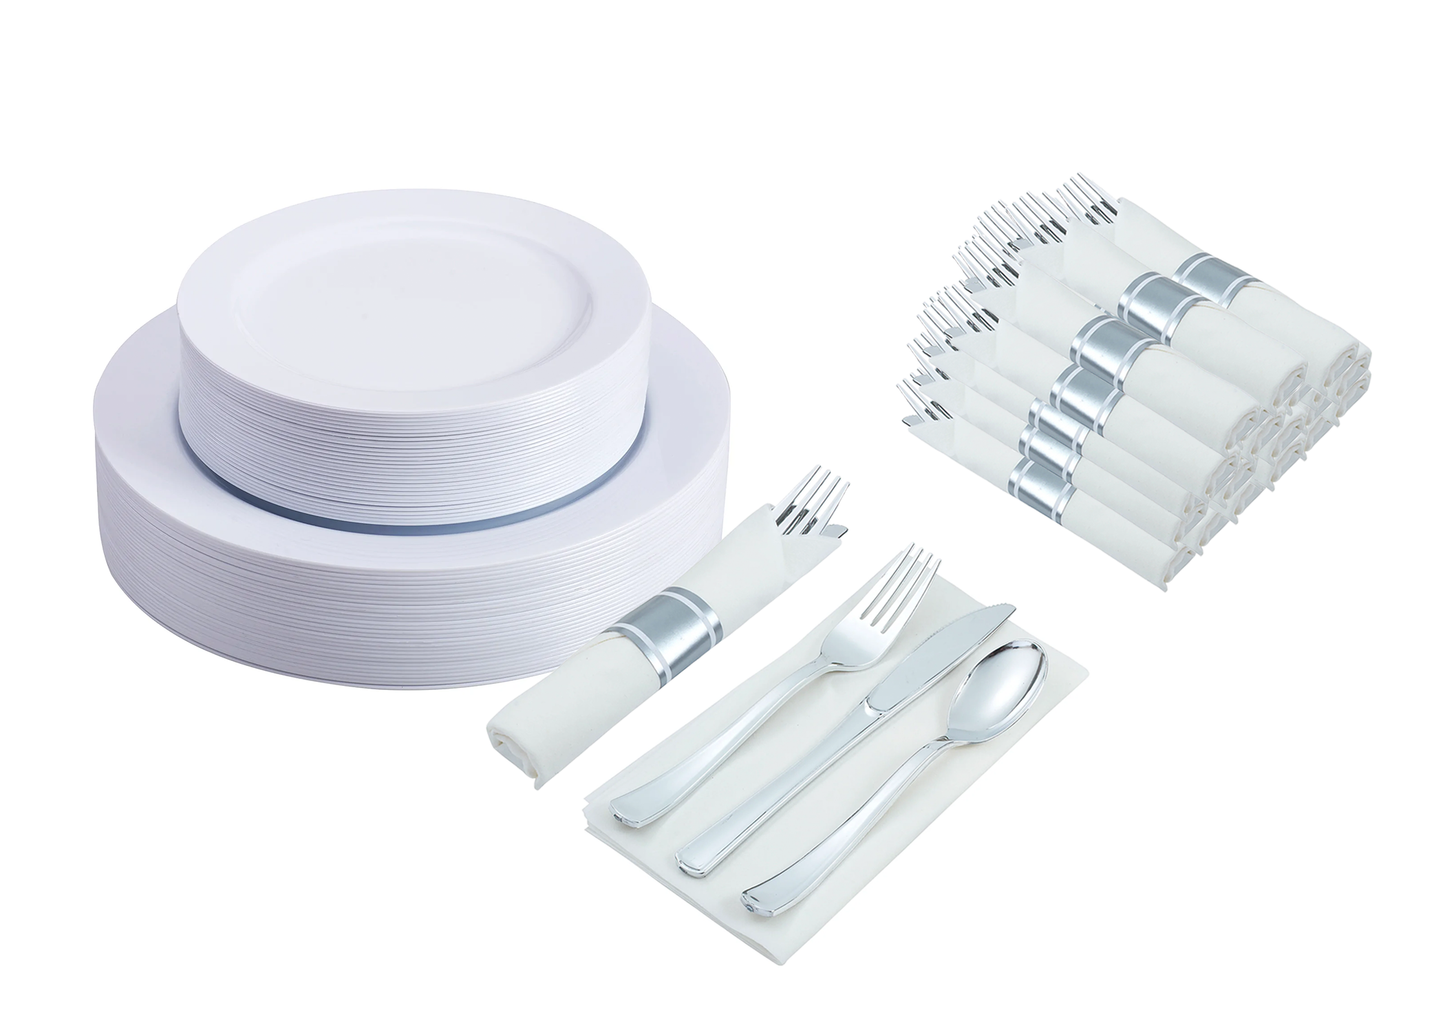 260 -Piece white dinnerware set for 30 guests Includes: 60 white design plastic plates, 250 silver colored  silverware utensils, 50 napkins & 50 cups